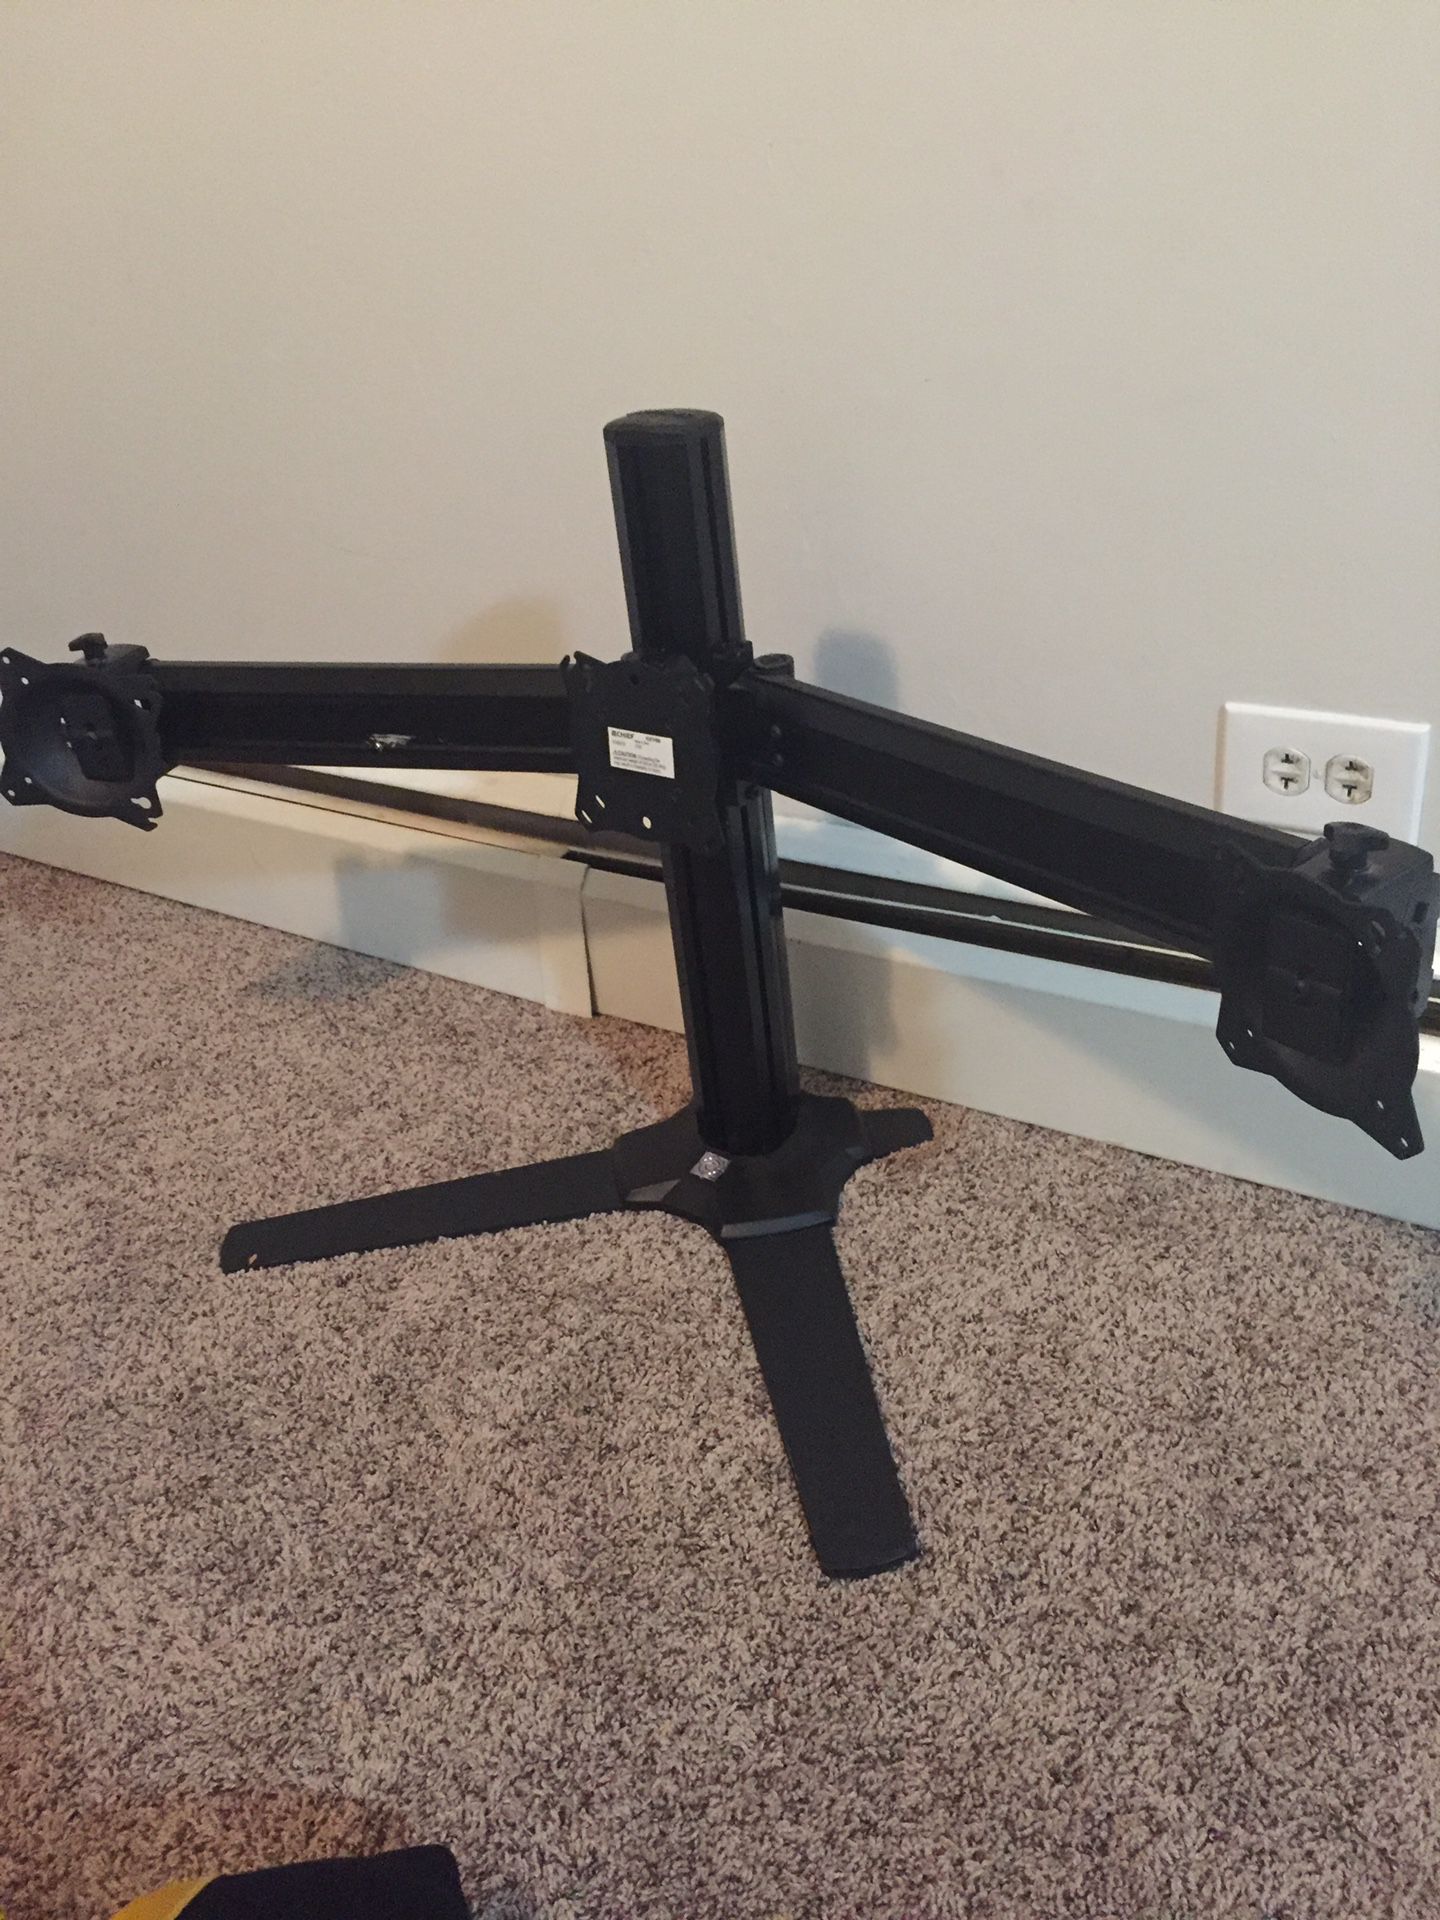 Chief adjustable 3 Monitor Stand